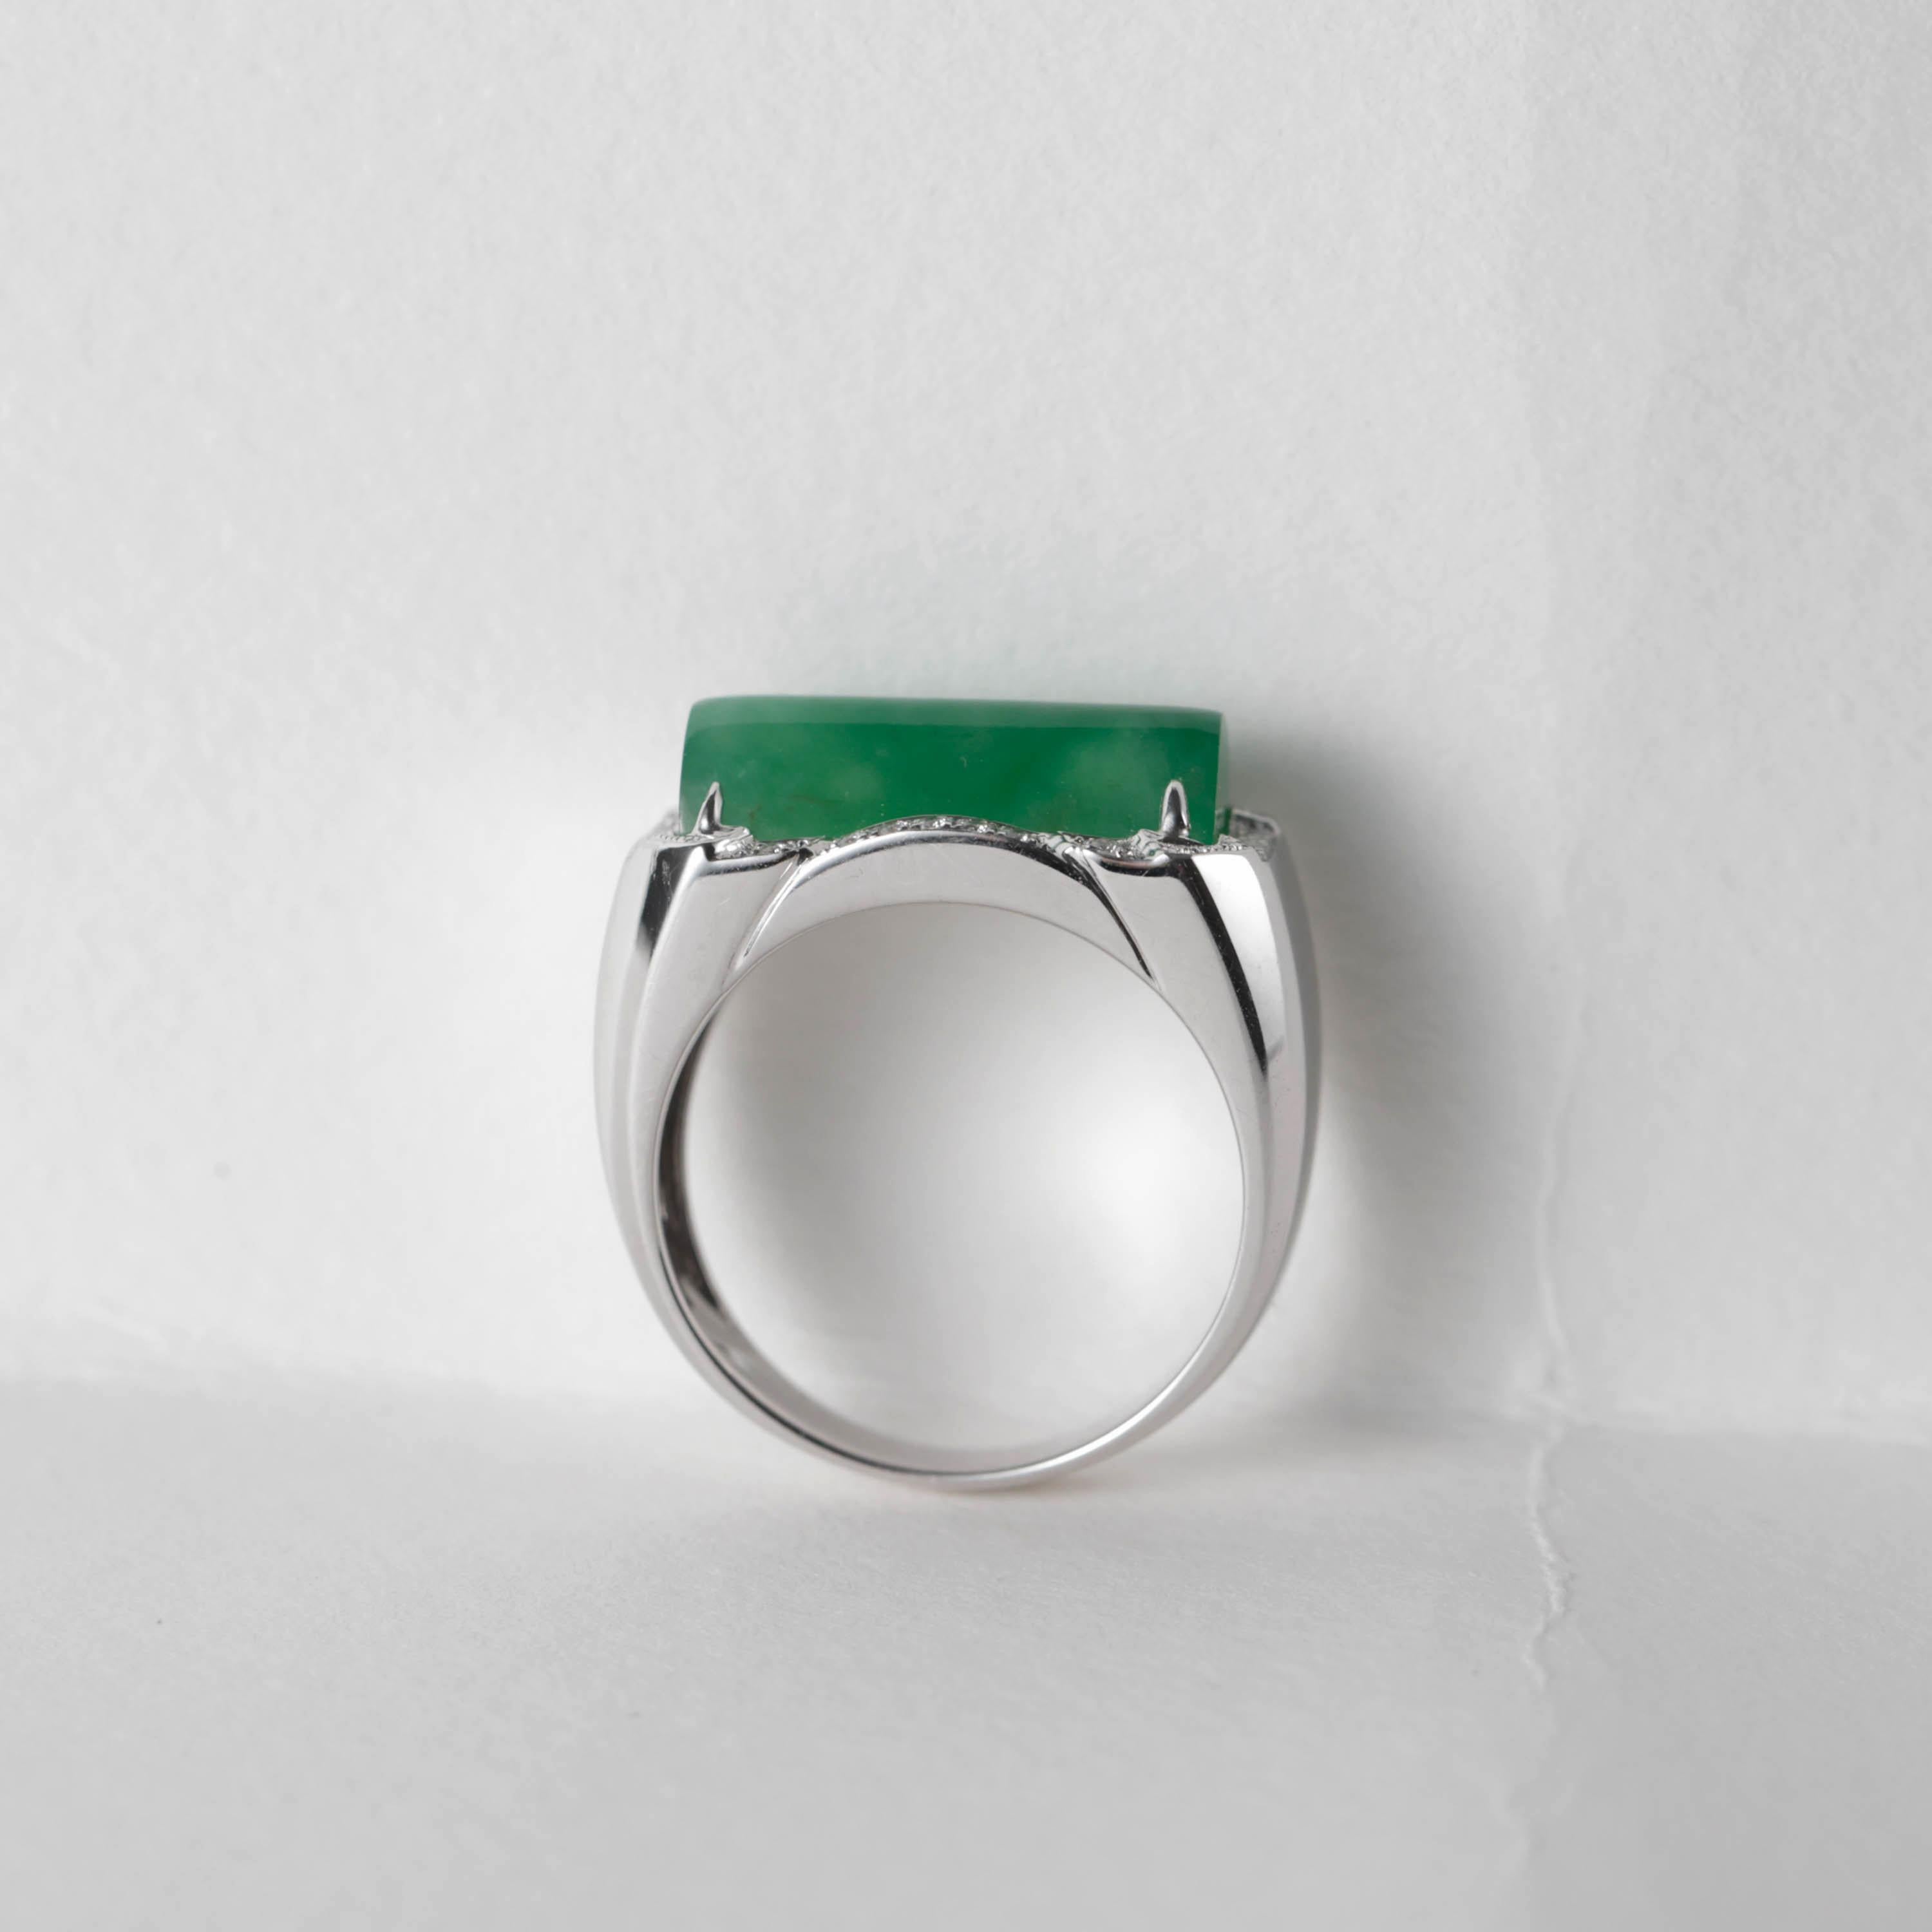 Jade Ring with Diamonds Certified Untreated, New & Unworn Size 9.5 For Sale 5